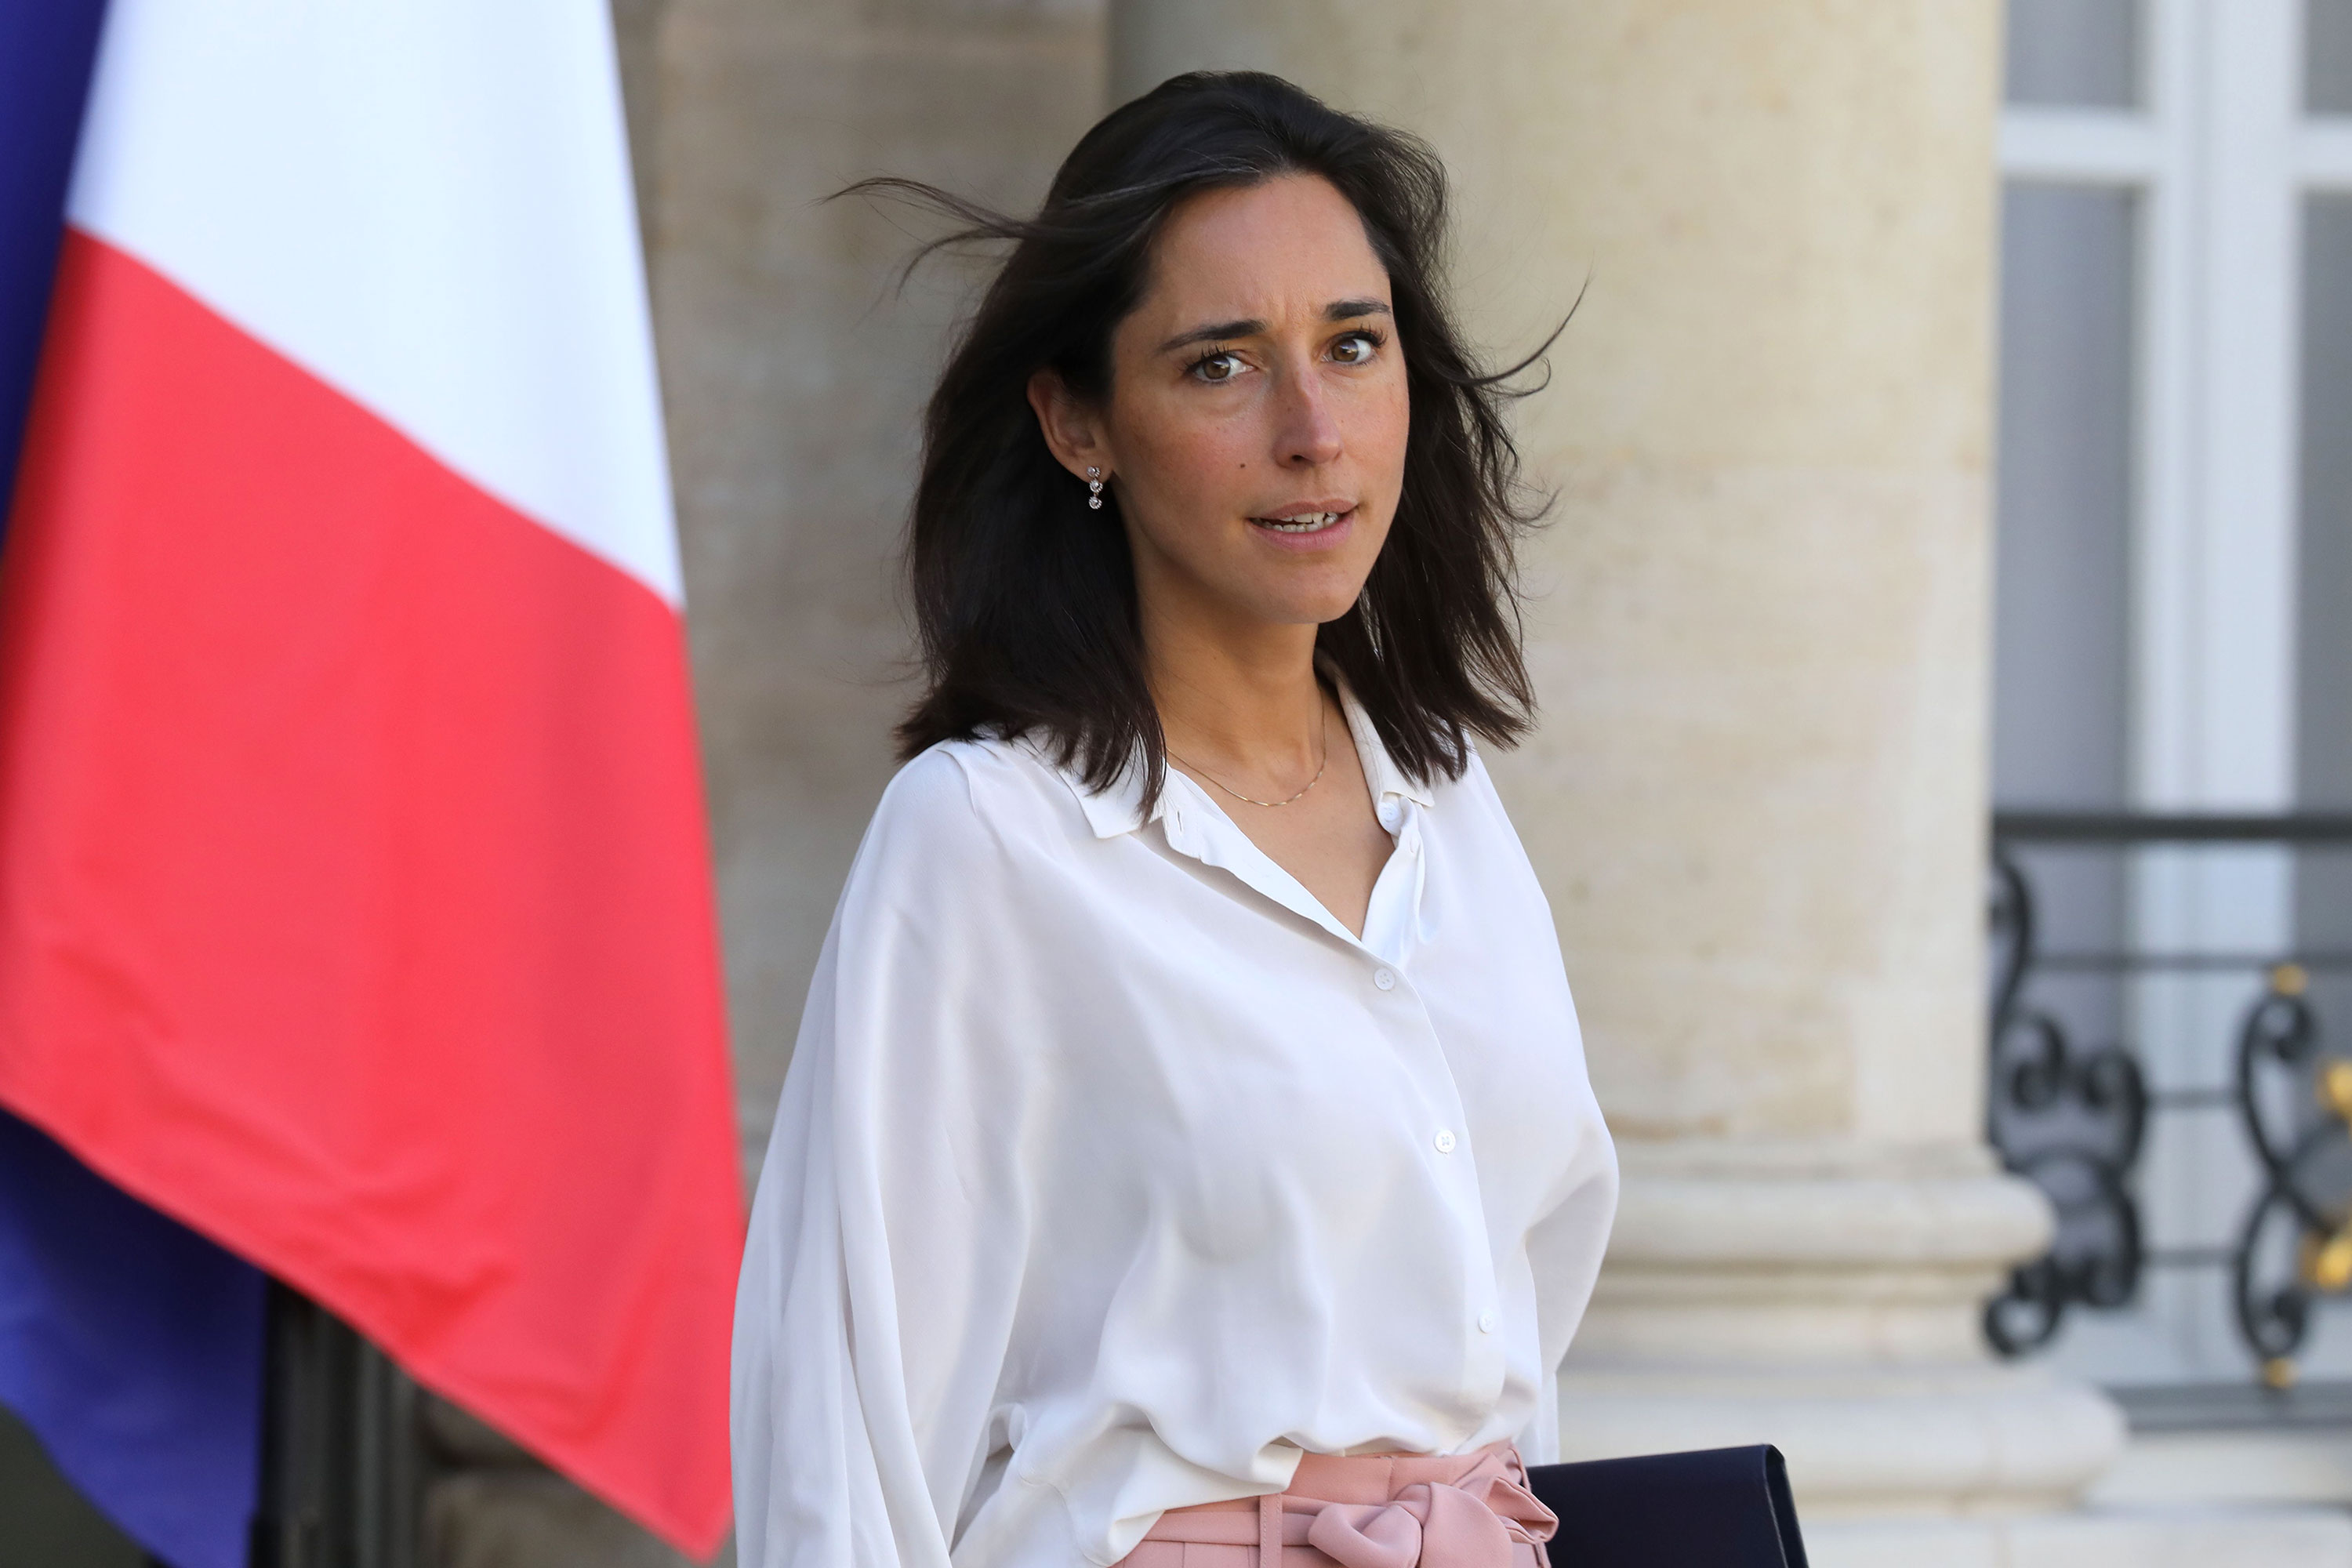 Brune Poirson leaves the Elysee palace at the end of the weekly cabinet meeting in September 2019 in Paris. 